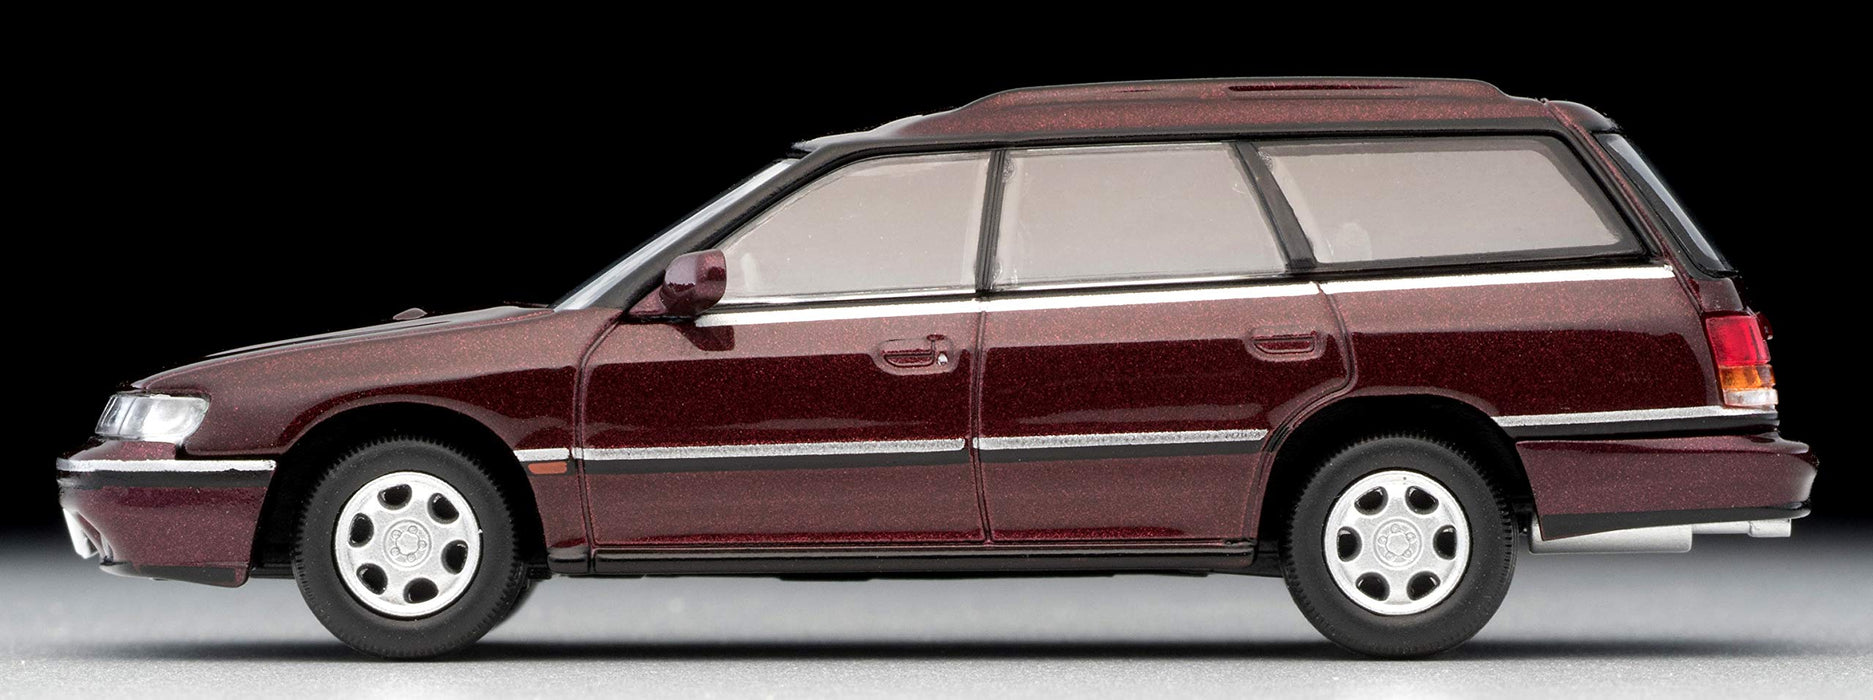 Tomica Limited Vintage Neo 1/64 TLV-N201A Subaru Legacy Touring Wagon 307822 NEW_4